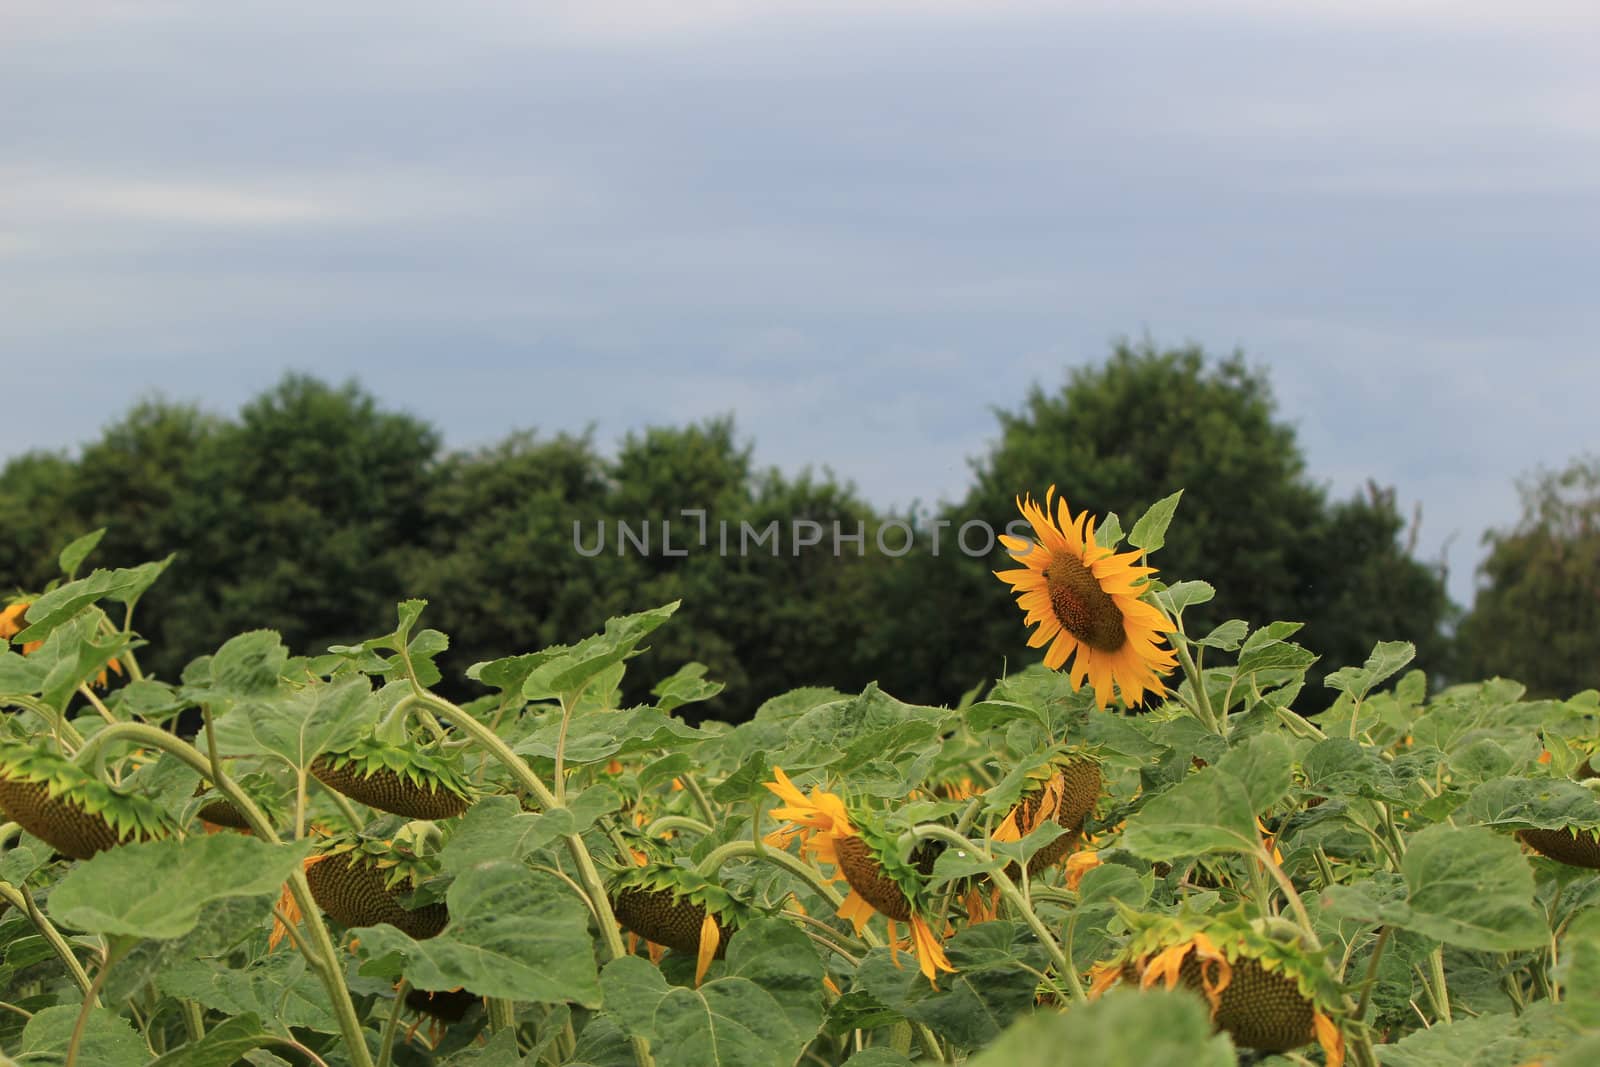 Sunflower upon others by Elenaphotos21